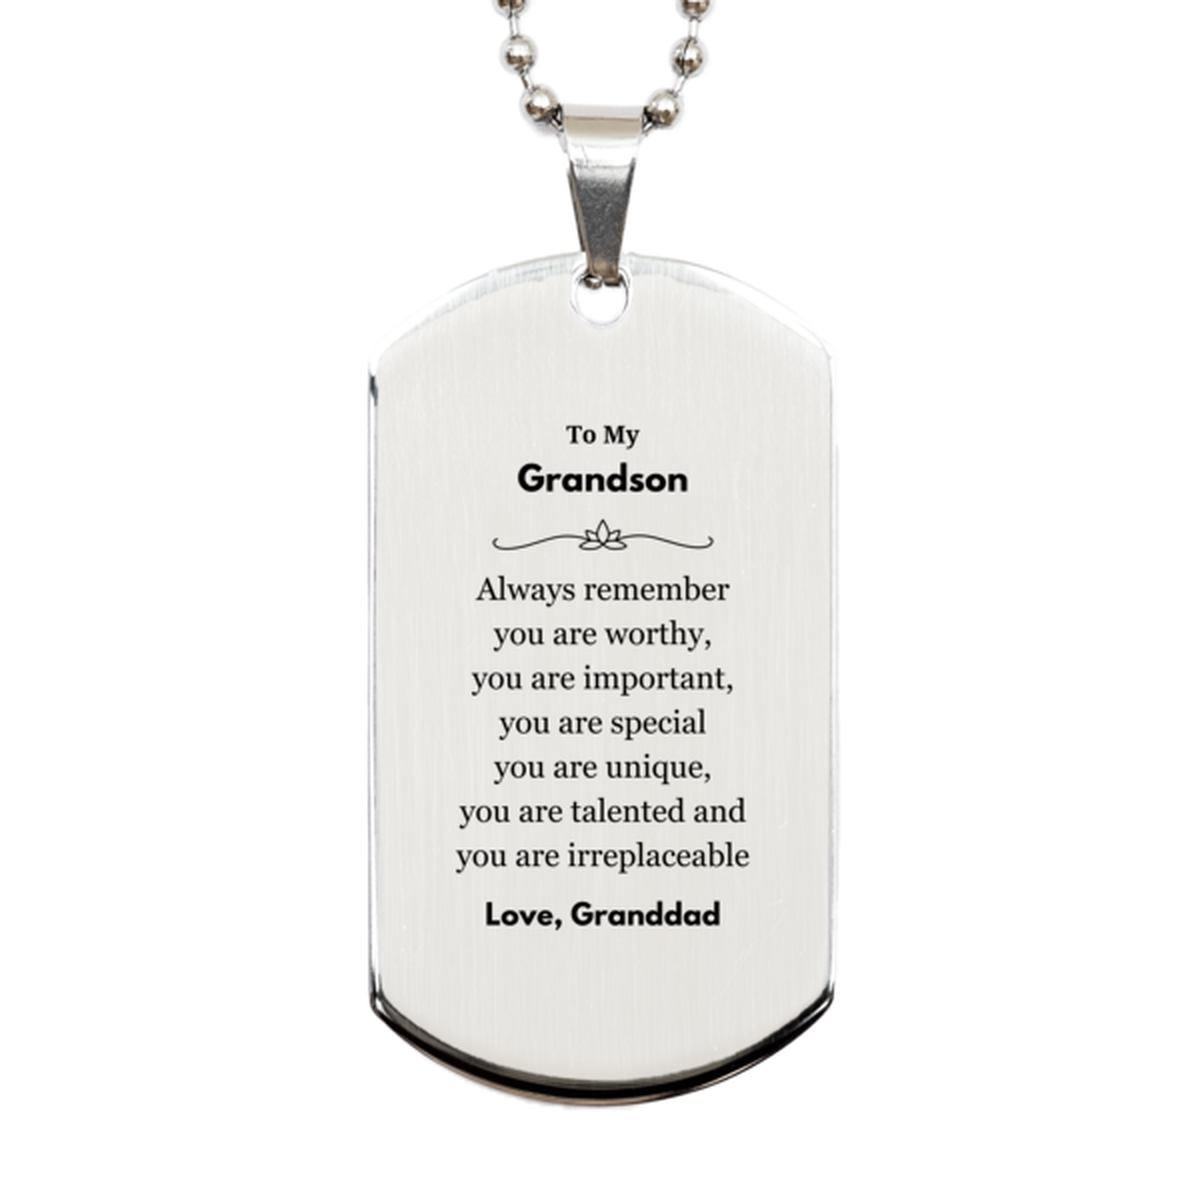 Grandson Birthday Gifts from Granddad, Inspirational Silver Dog Tag for Grandson Christmas Graduation Gifts for Grandson Always remember you are worthy, you are important. Love, Granddad